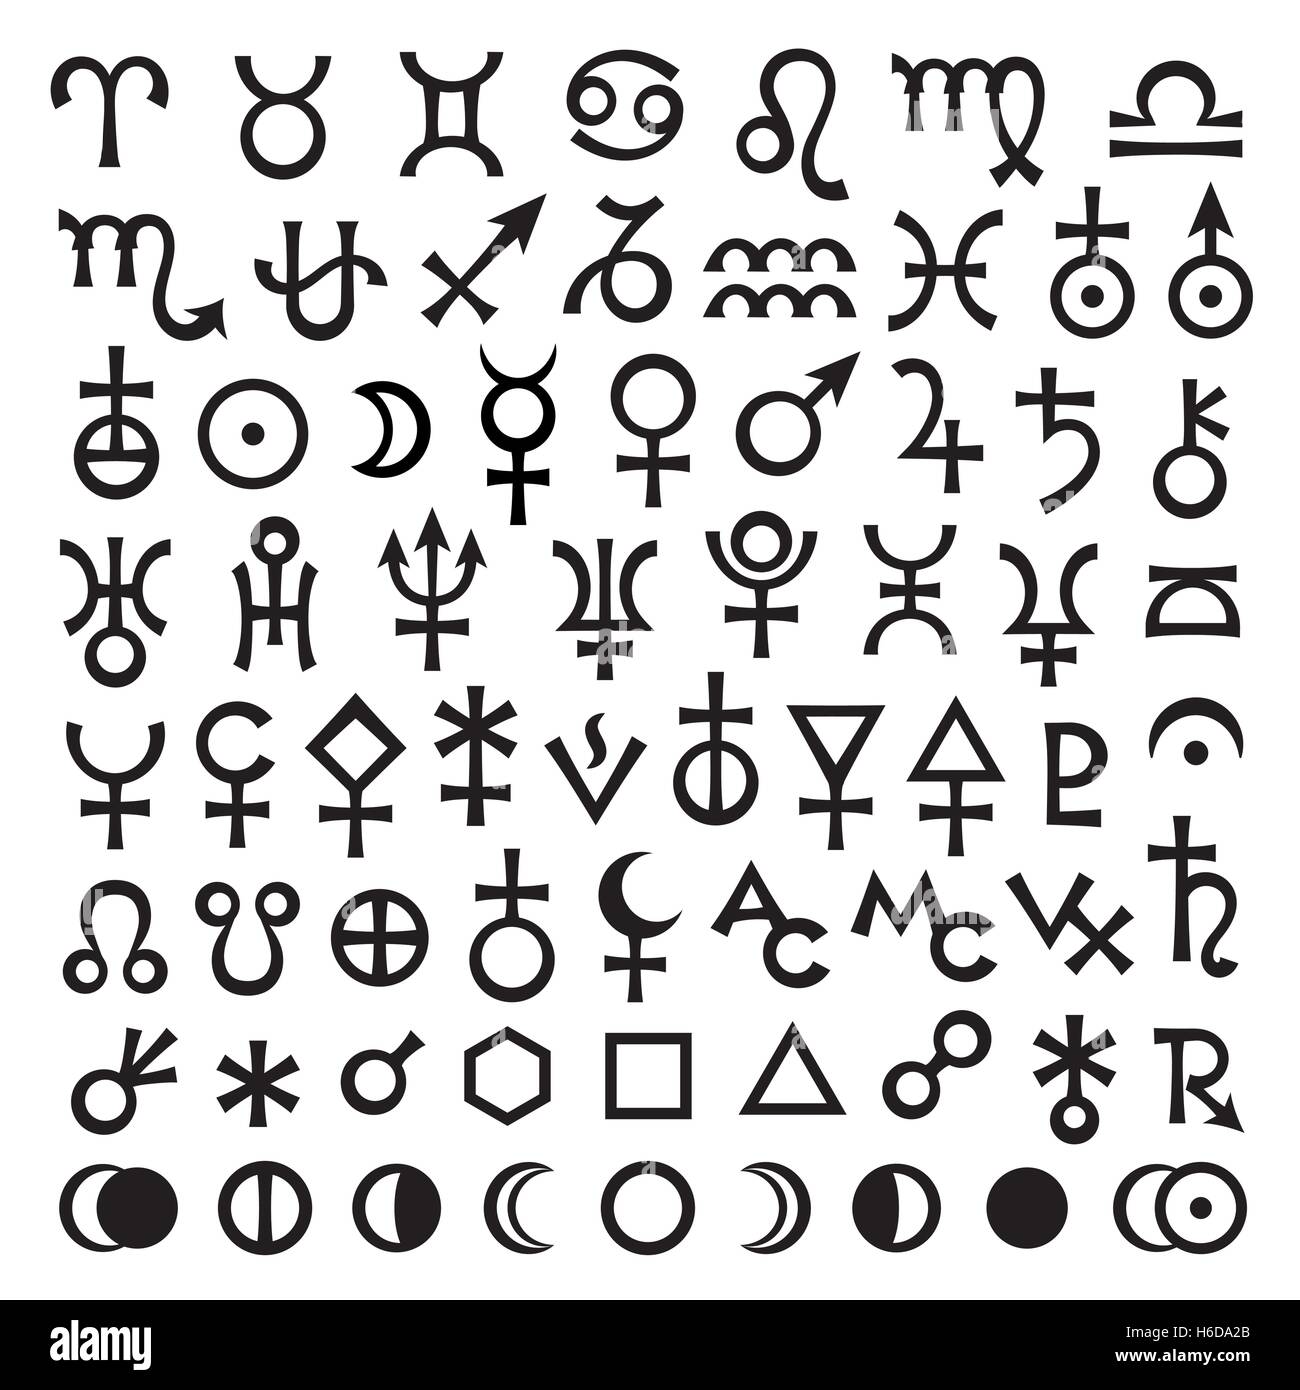 Astrological Signs of Zodiac, Planets, Asteroids, Aspects, Lunar phases, etc. (The Big Set of Main Astrological Symbols) v. 2 Stock Vector